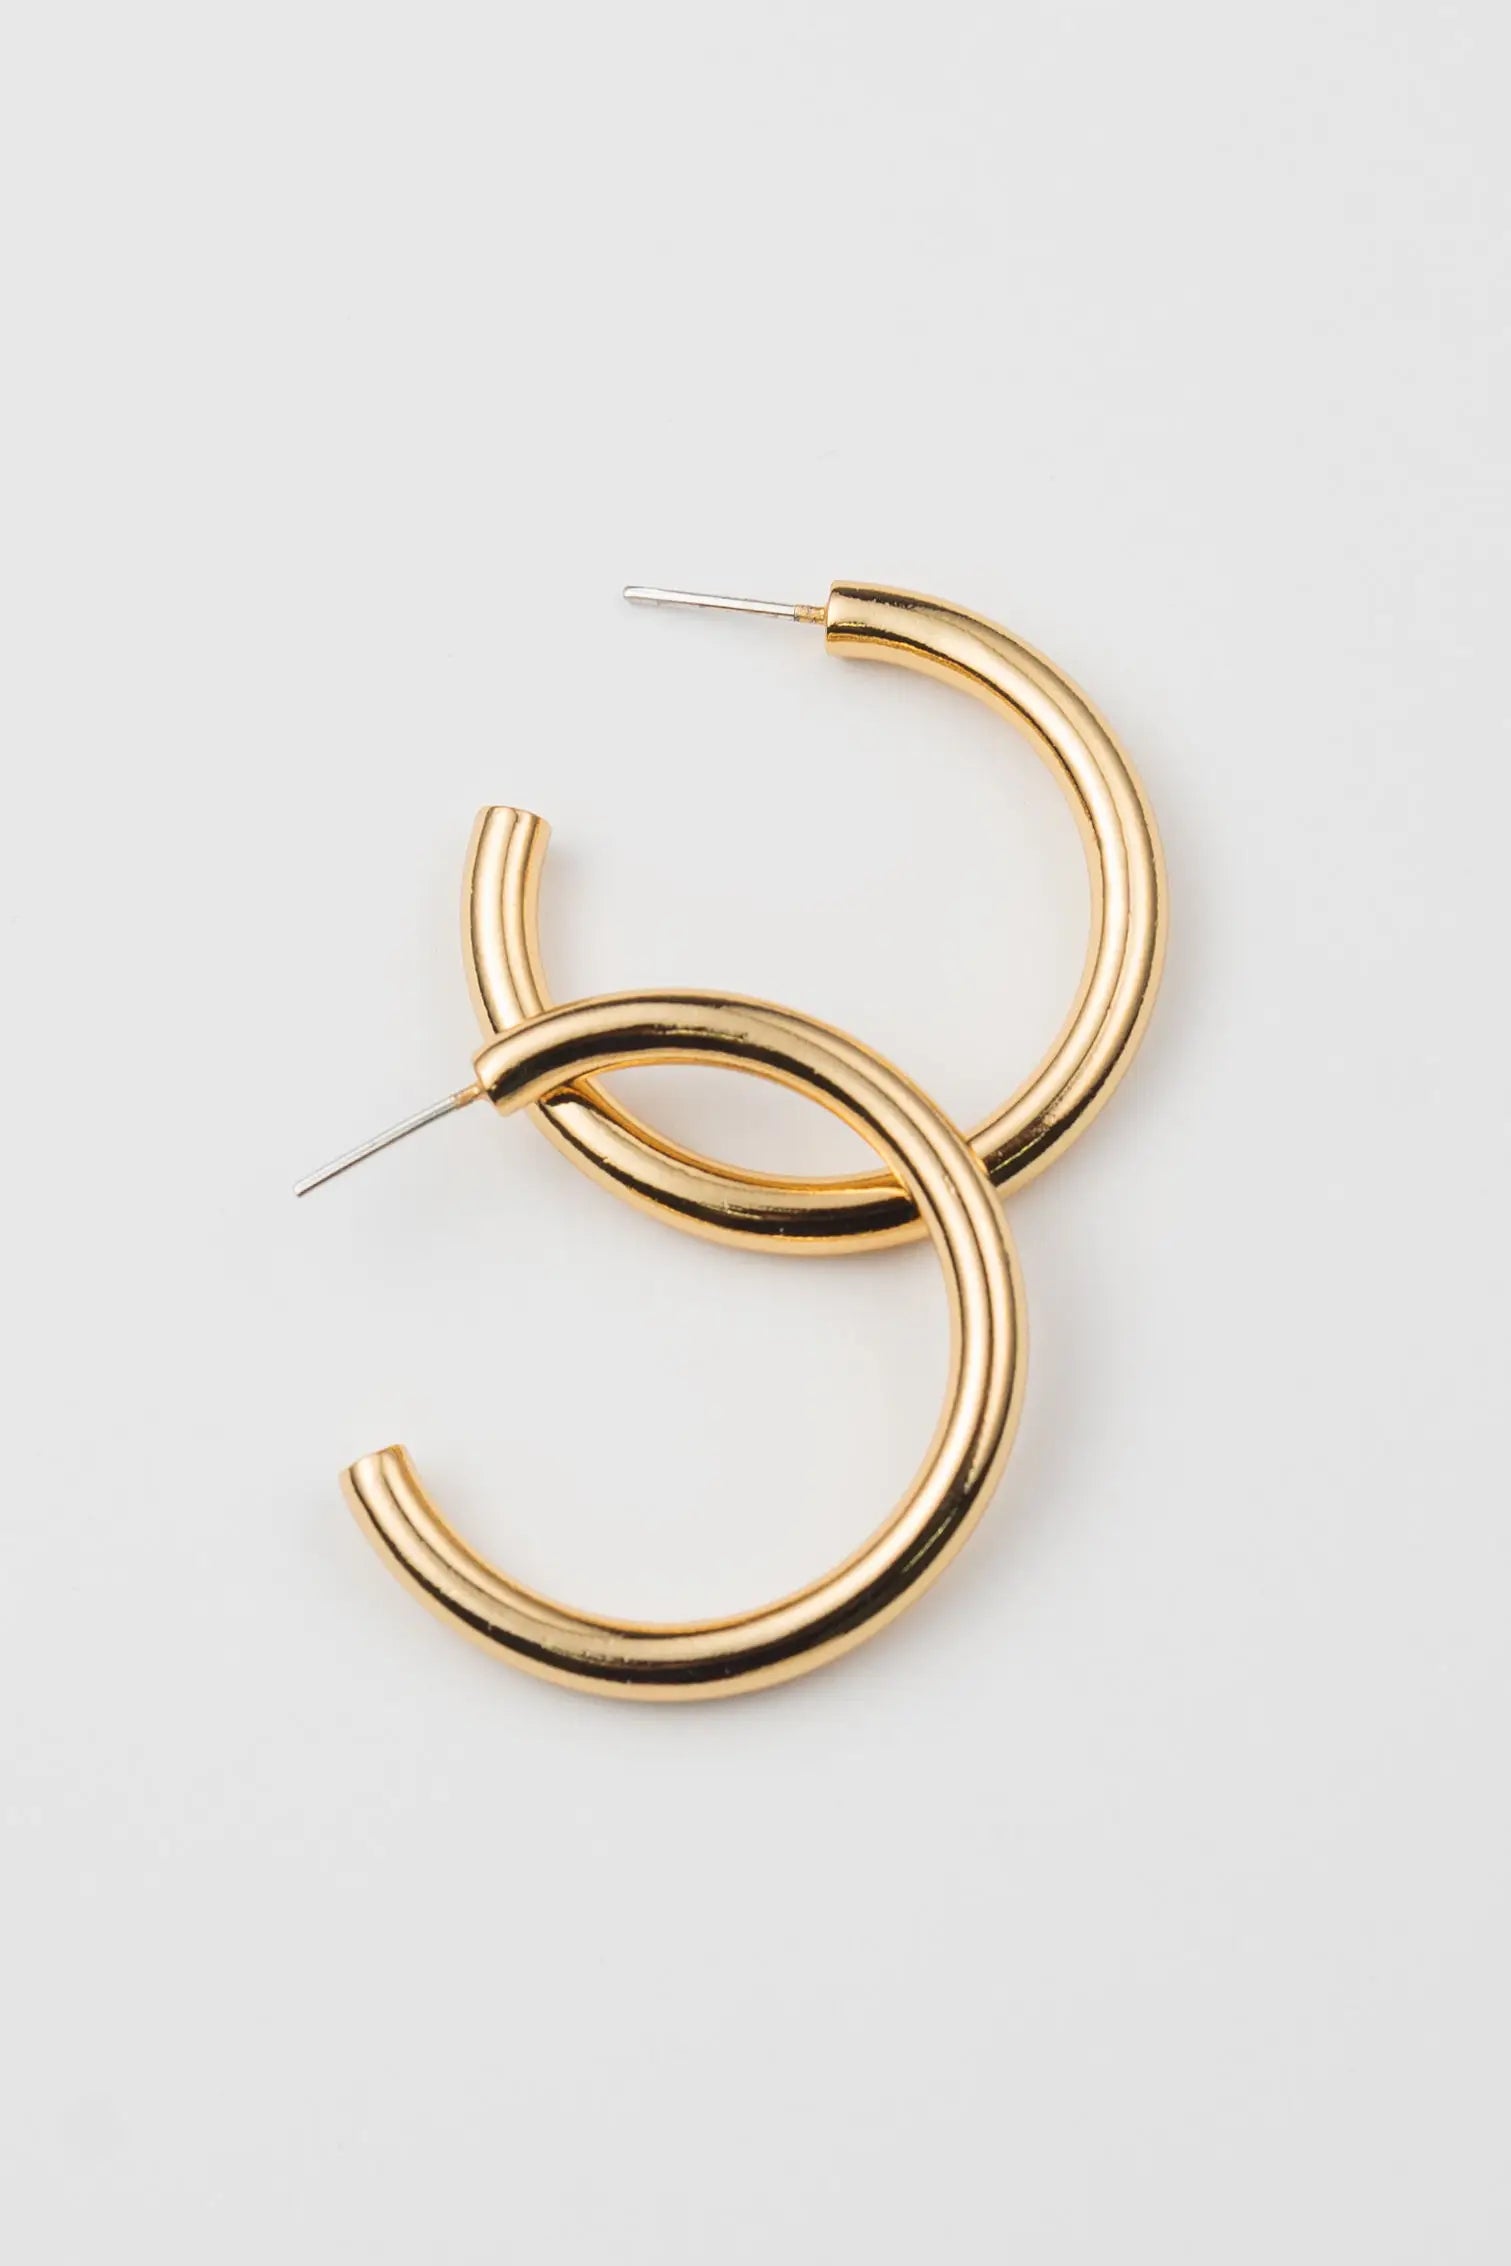 brenda grands jewelry, gold hoop earrings, tube hoops. womens jewelry, fashion jewelry, ethically made, handmade, sustainable fashion, curate